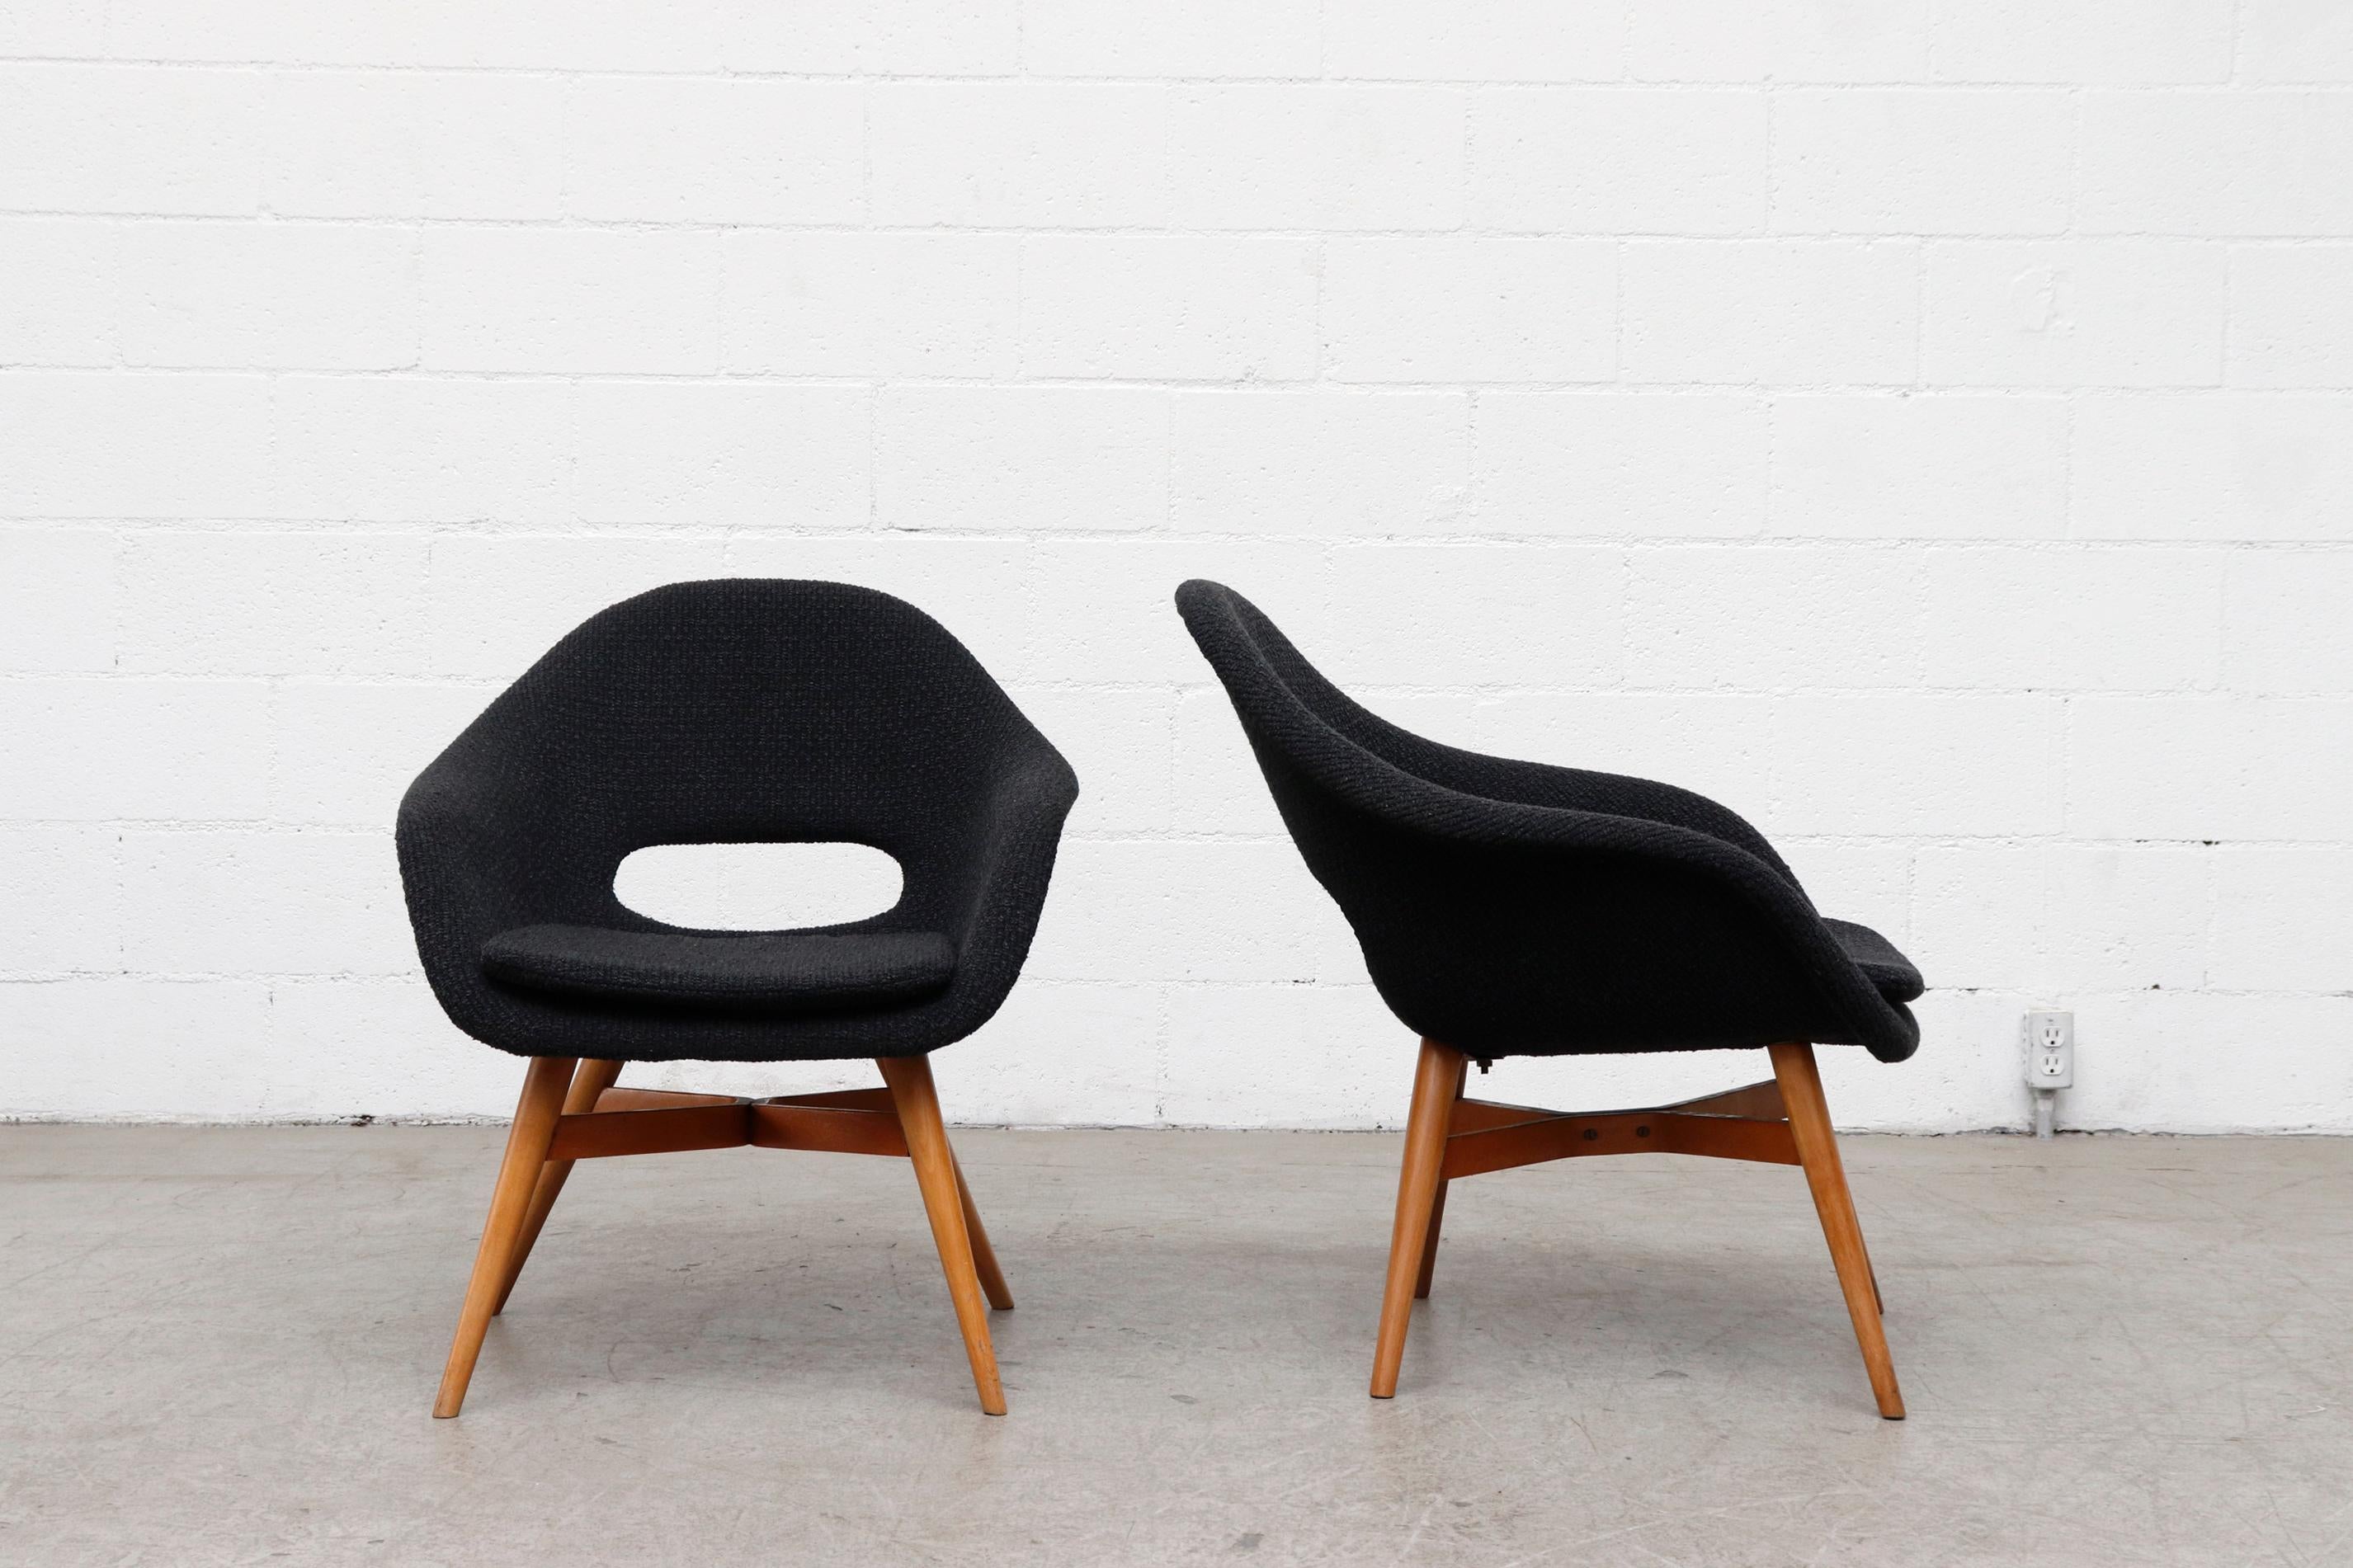 Nubby black upholstered, Mid-Century bucket chairs designed by influential Czech designer Miroslav Navrátil for the Vertex Furniture Company.  Chairs have their original birch frames. In good overall condition with some age apprpriate frame wear.